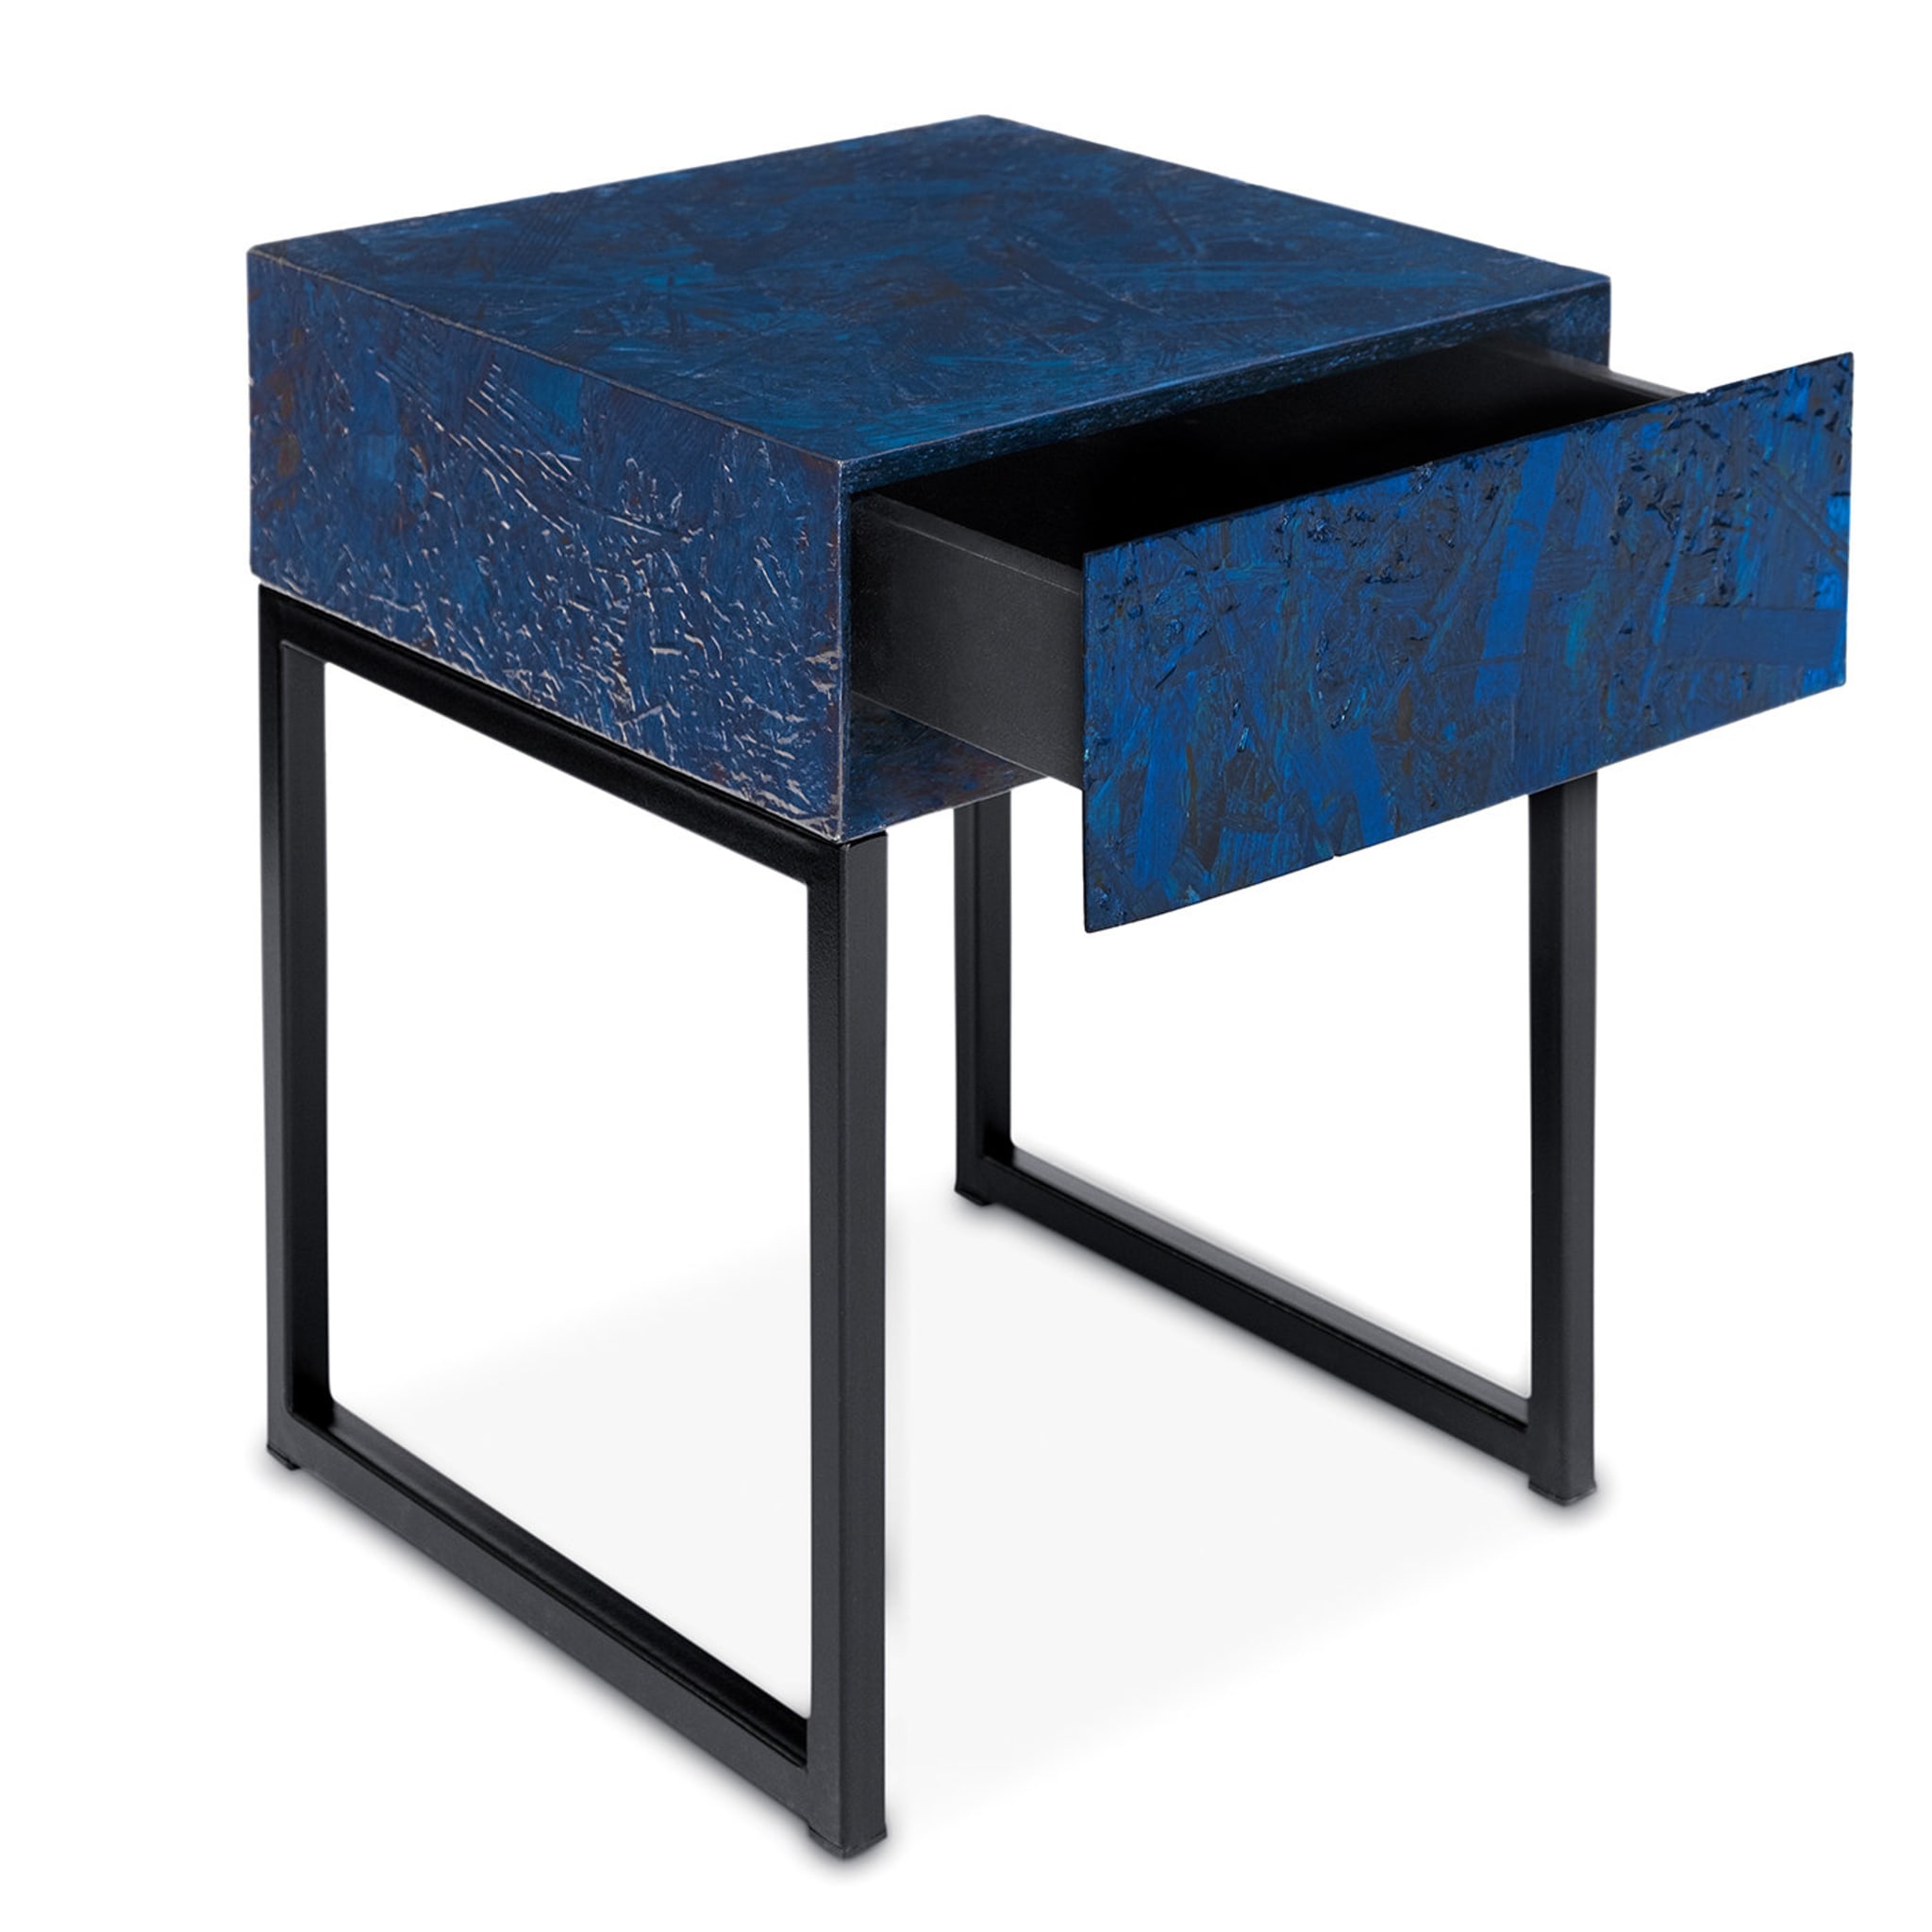 Spring Bedside Table With Drawer Blue by Fabrizio Contaldo  - Alternative view 2